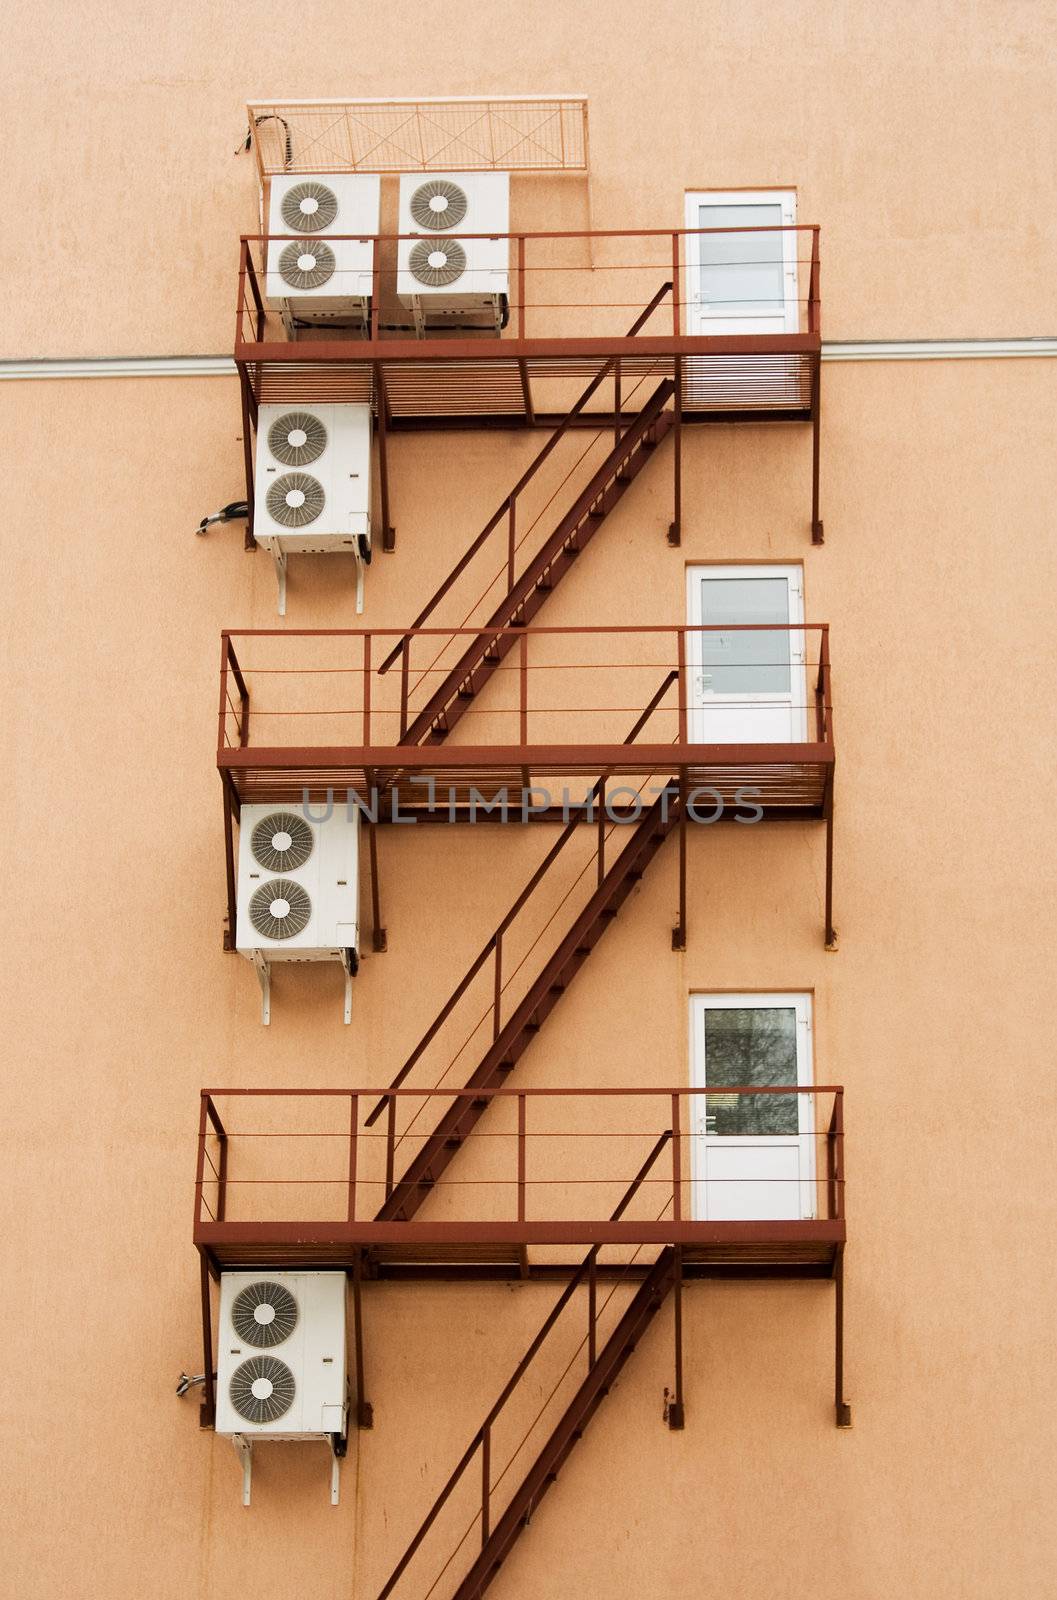 External air-conditioner units mounted outside on a wall